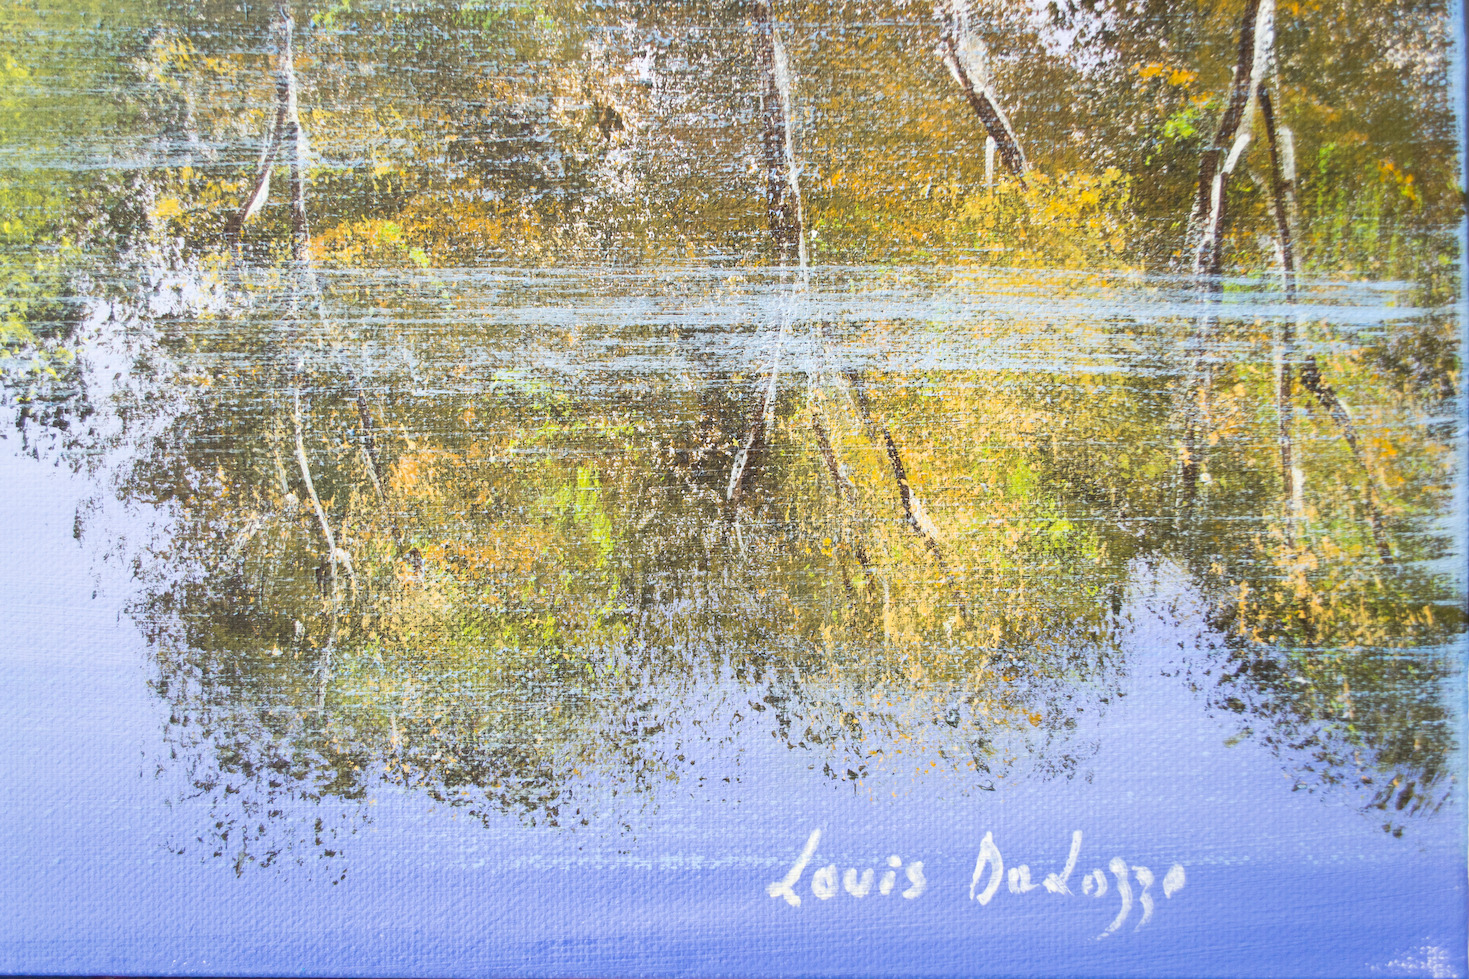 Close Up Signature Of Acrylic Painting "Peaceful Flow" By Louis Dalozzo